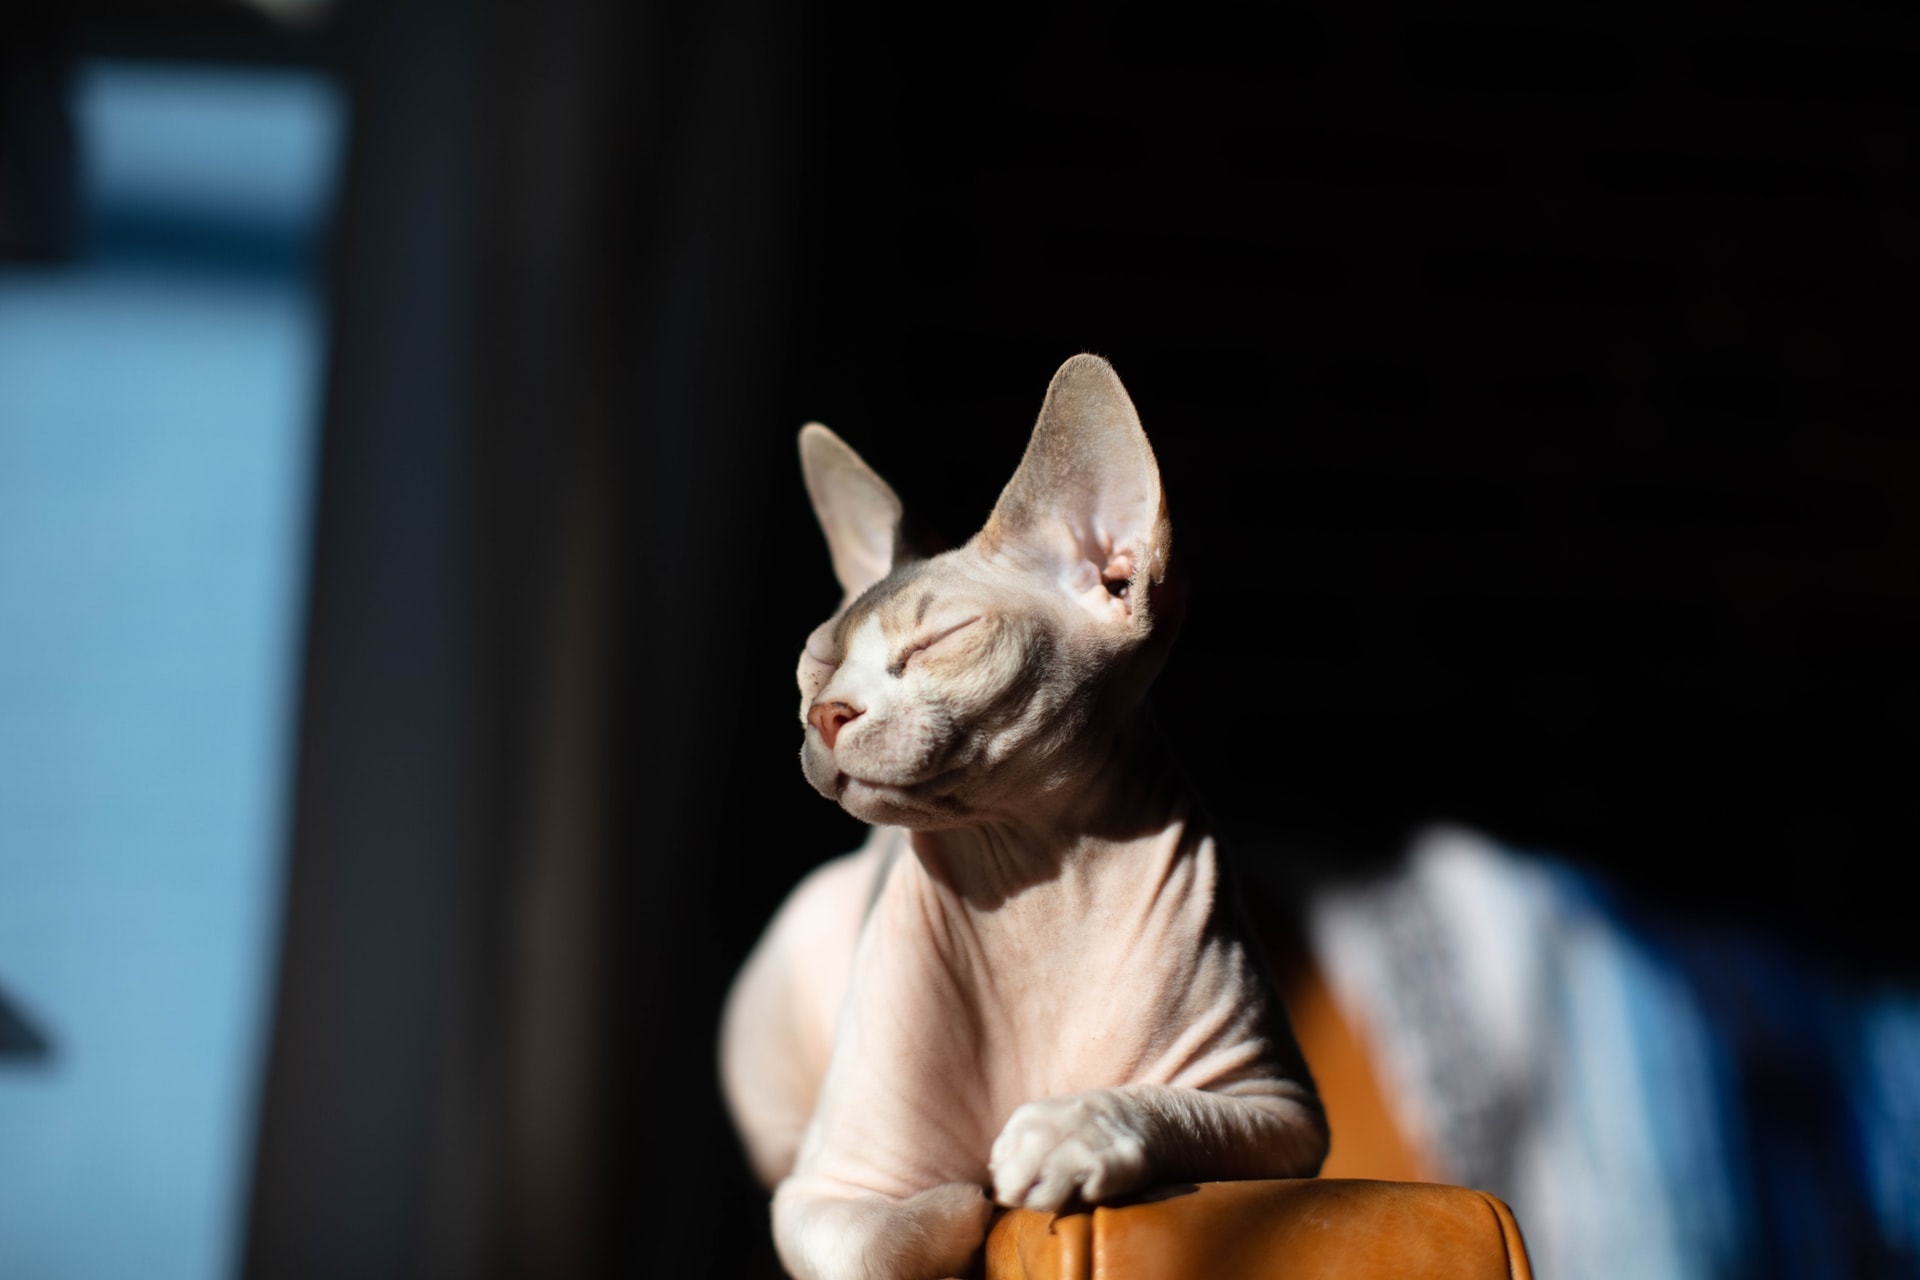 sphynx cat lying on sofa's arm basking in the heat of the sun